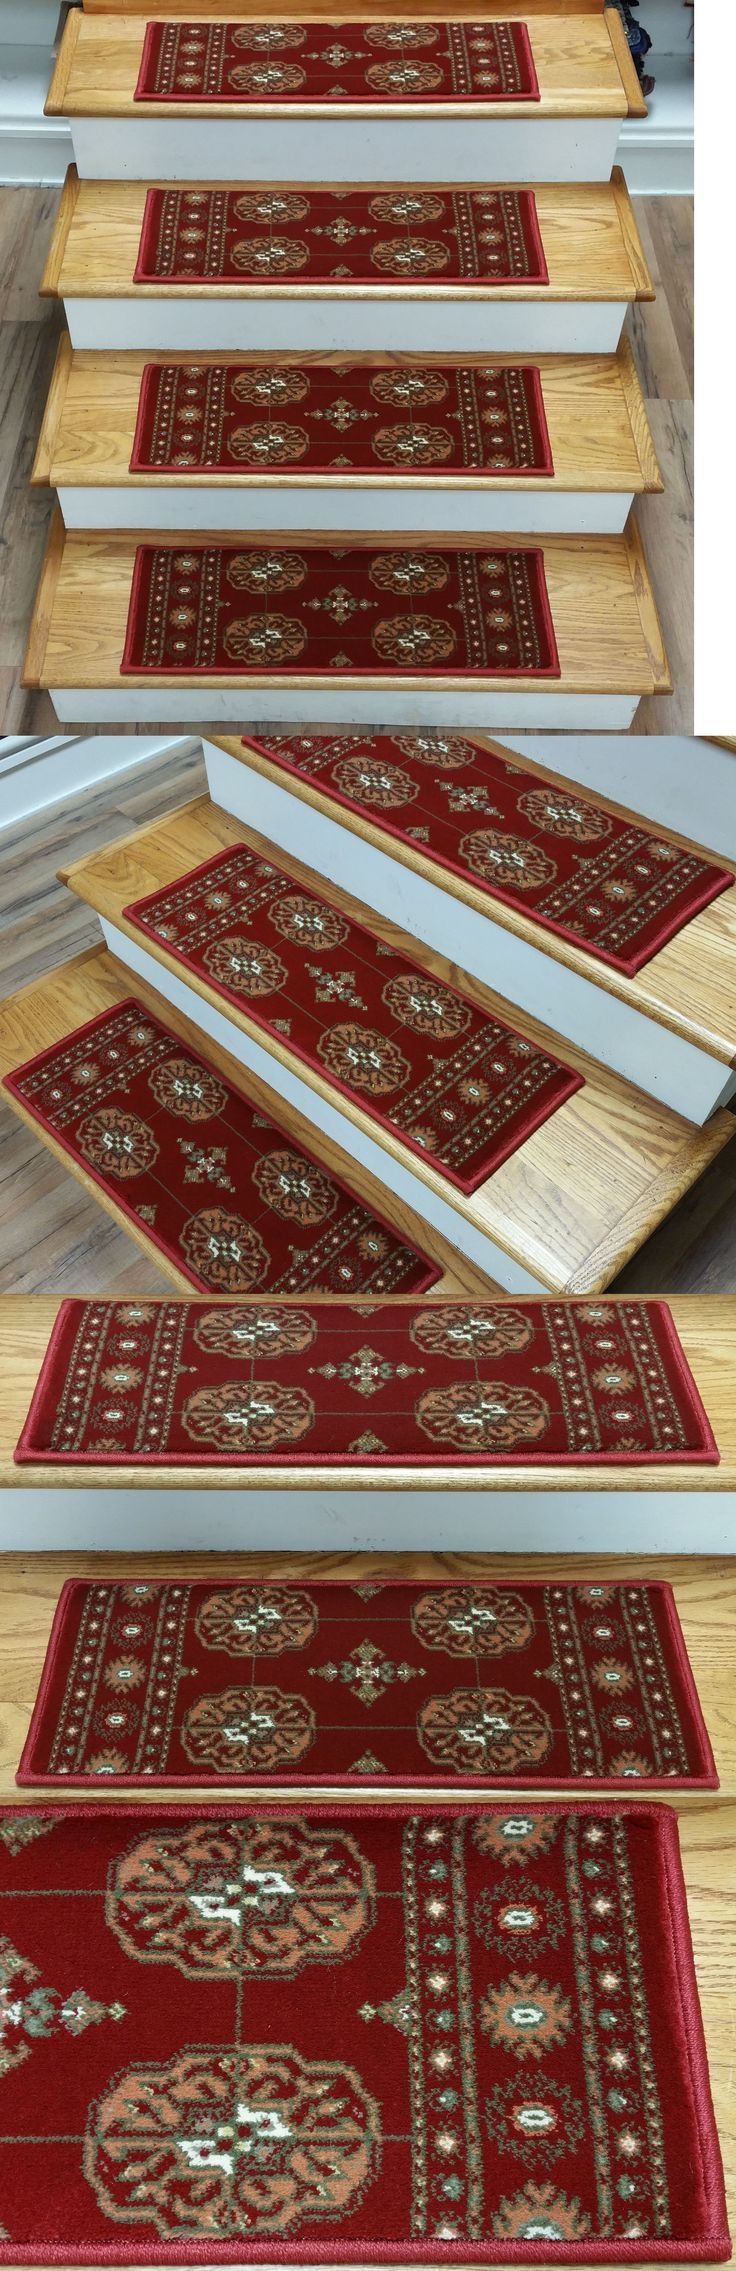 Top 25 Best Carpet Stair Treads Ideas On Pinterest Wood Stair In Removable Carpet Stair Treads (View 13 of 20)